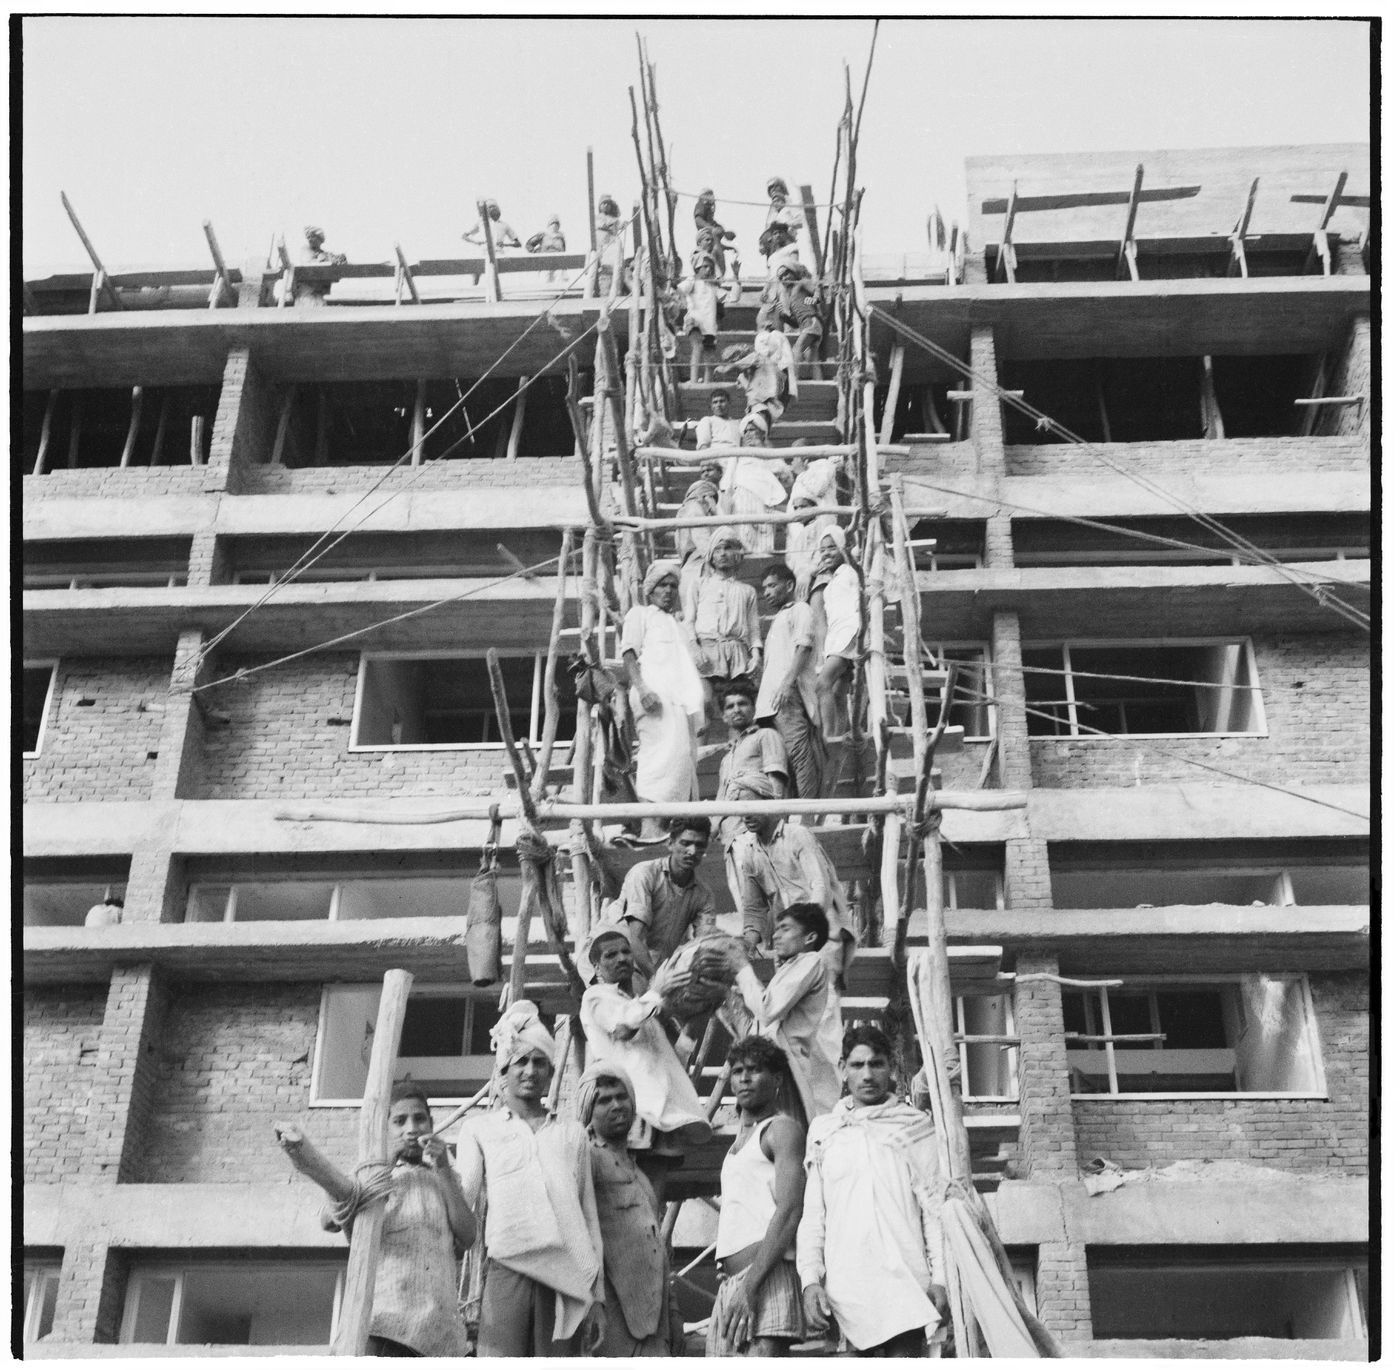 Workers form a human chain for pouring concrete manually at a building site in Chandigarh, India